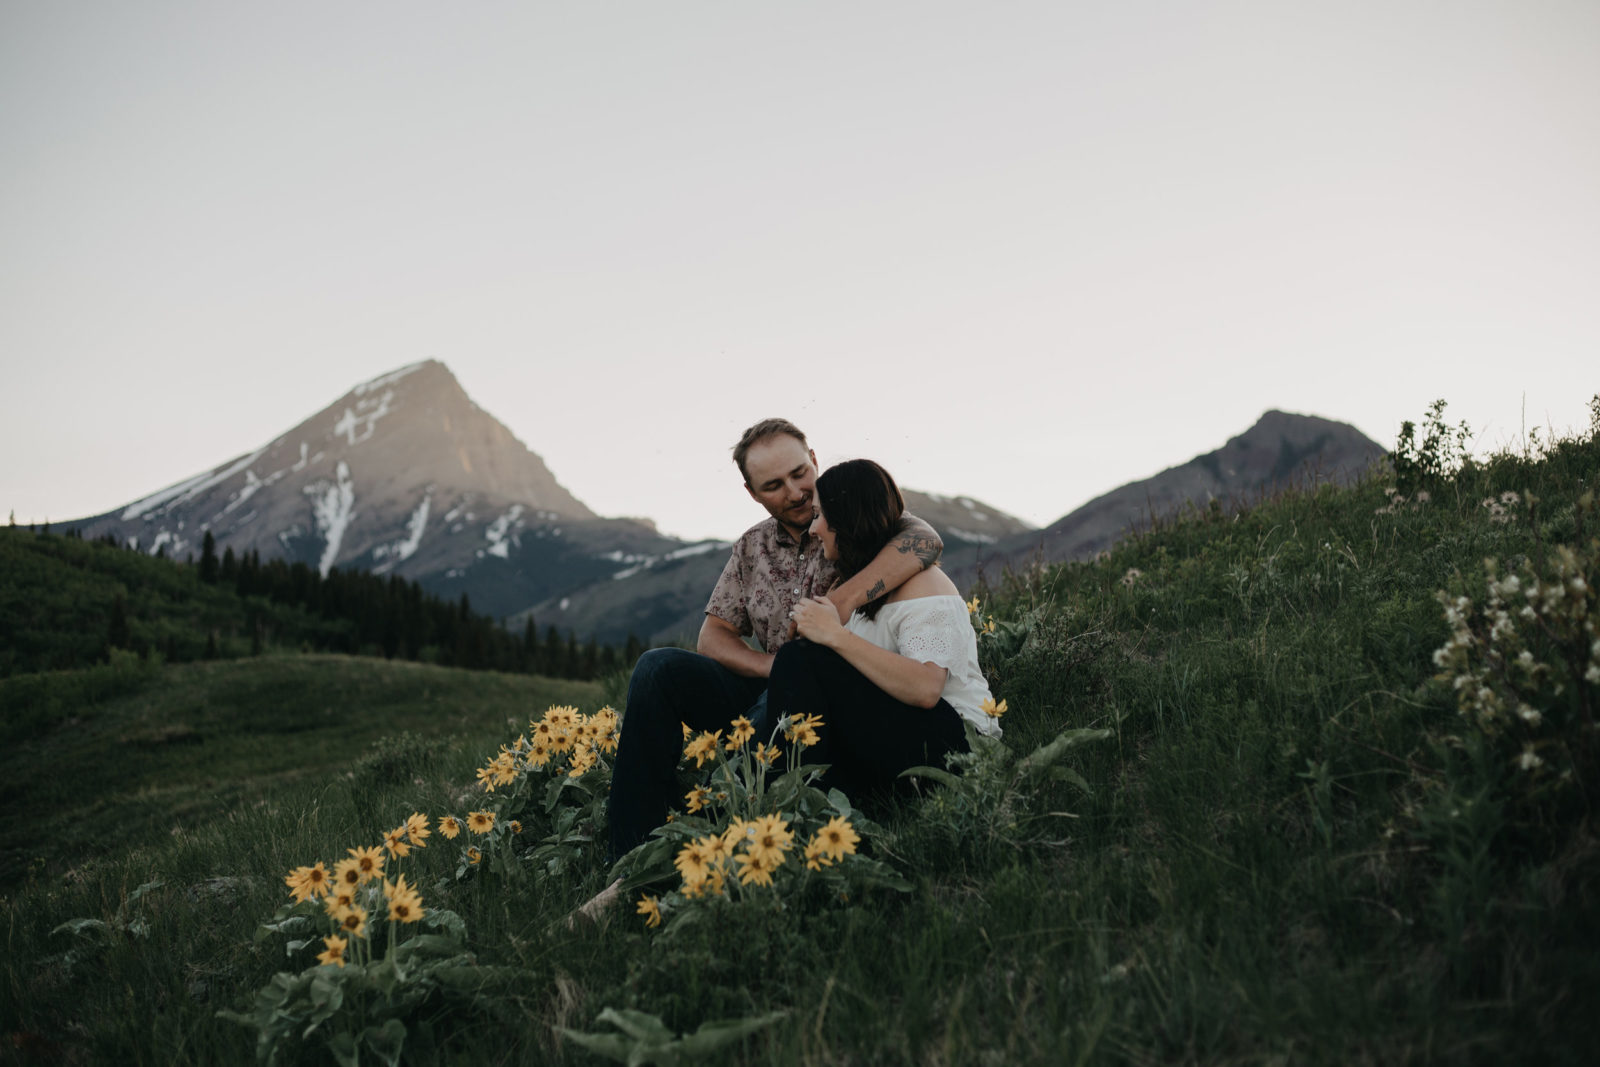 Engagement session advice from Malorie Reiter Photography.